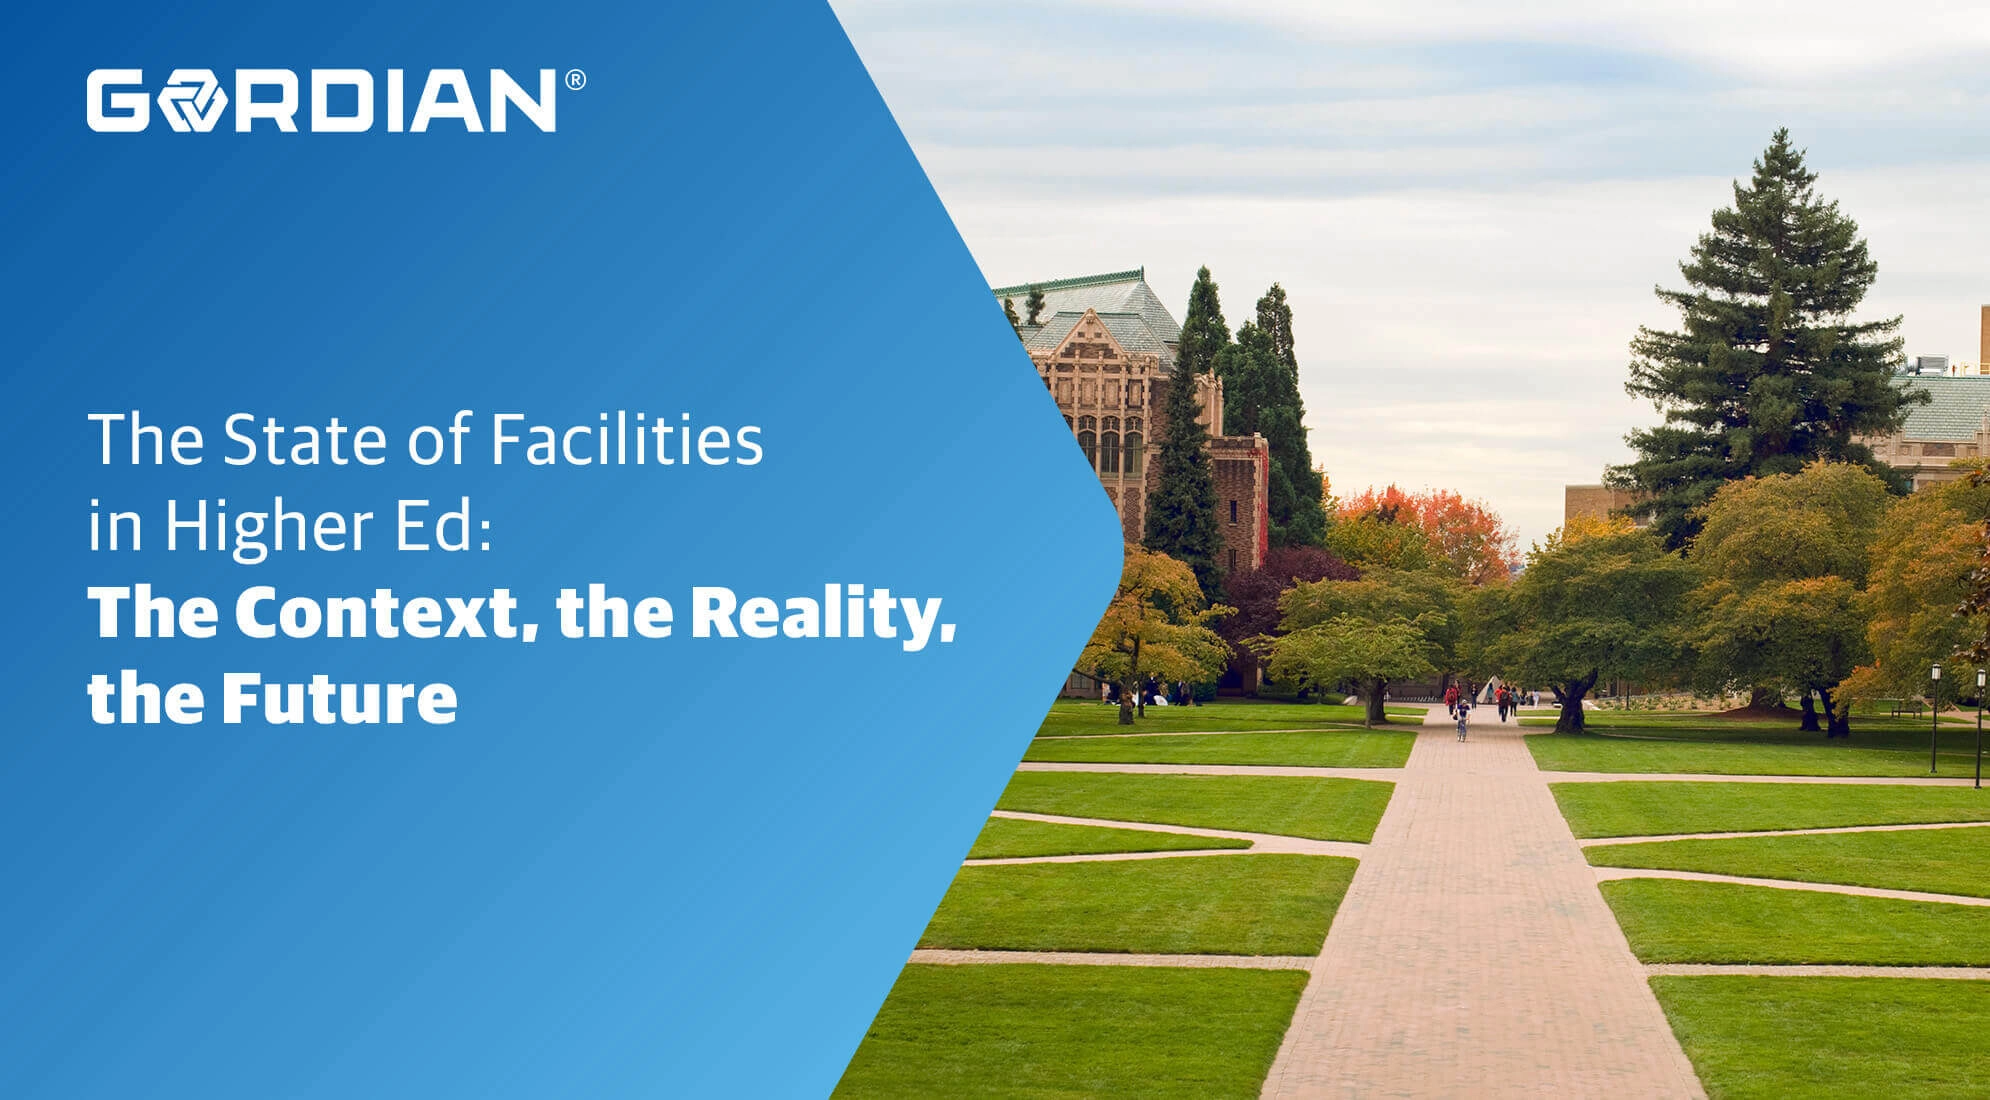 The State of Facilities in Higher Ed – The Context, the Reality, the Future